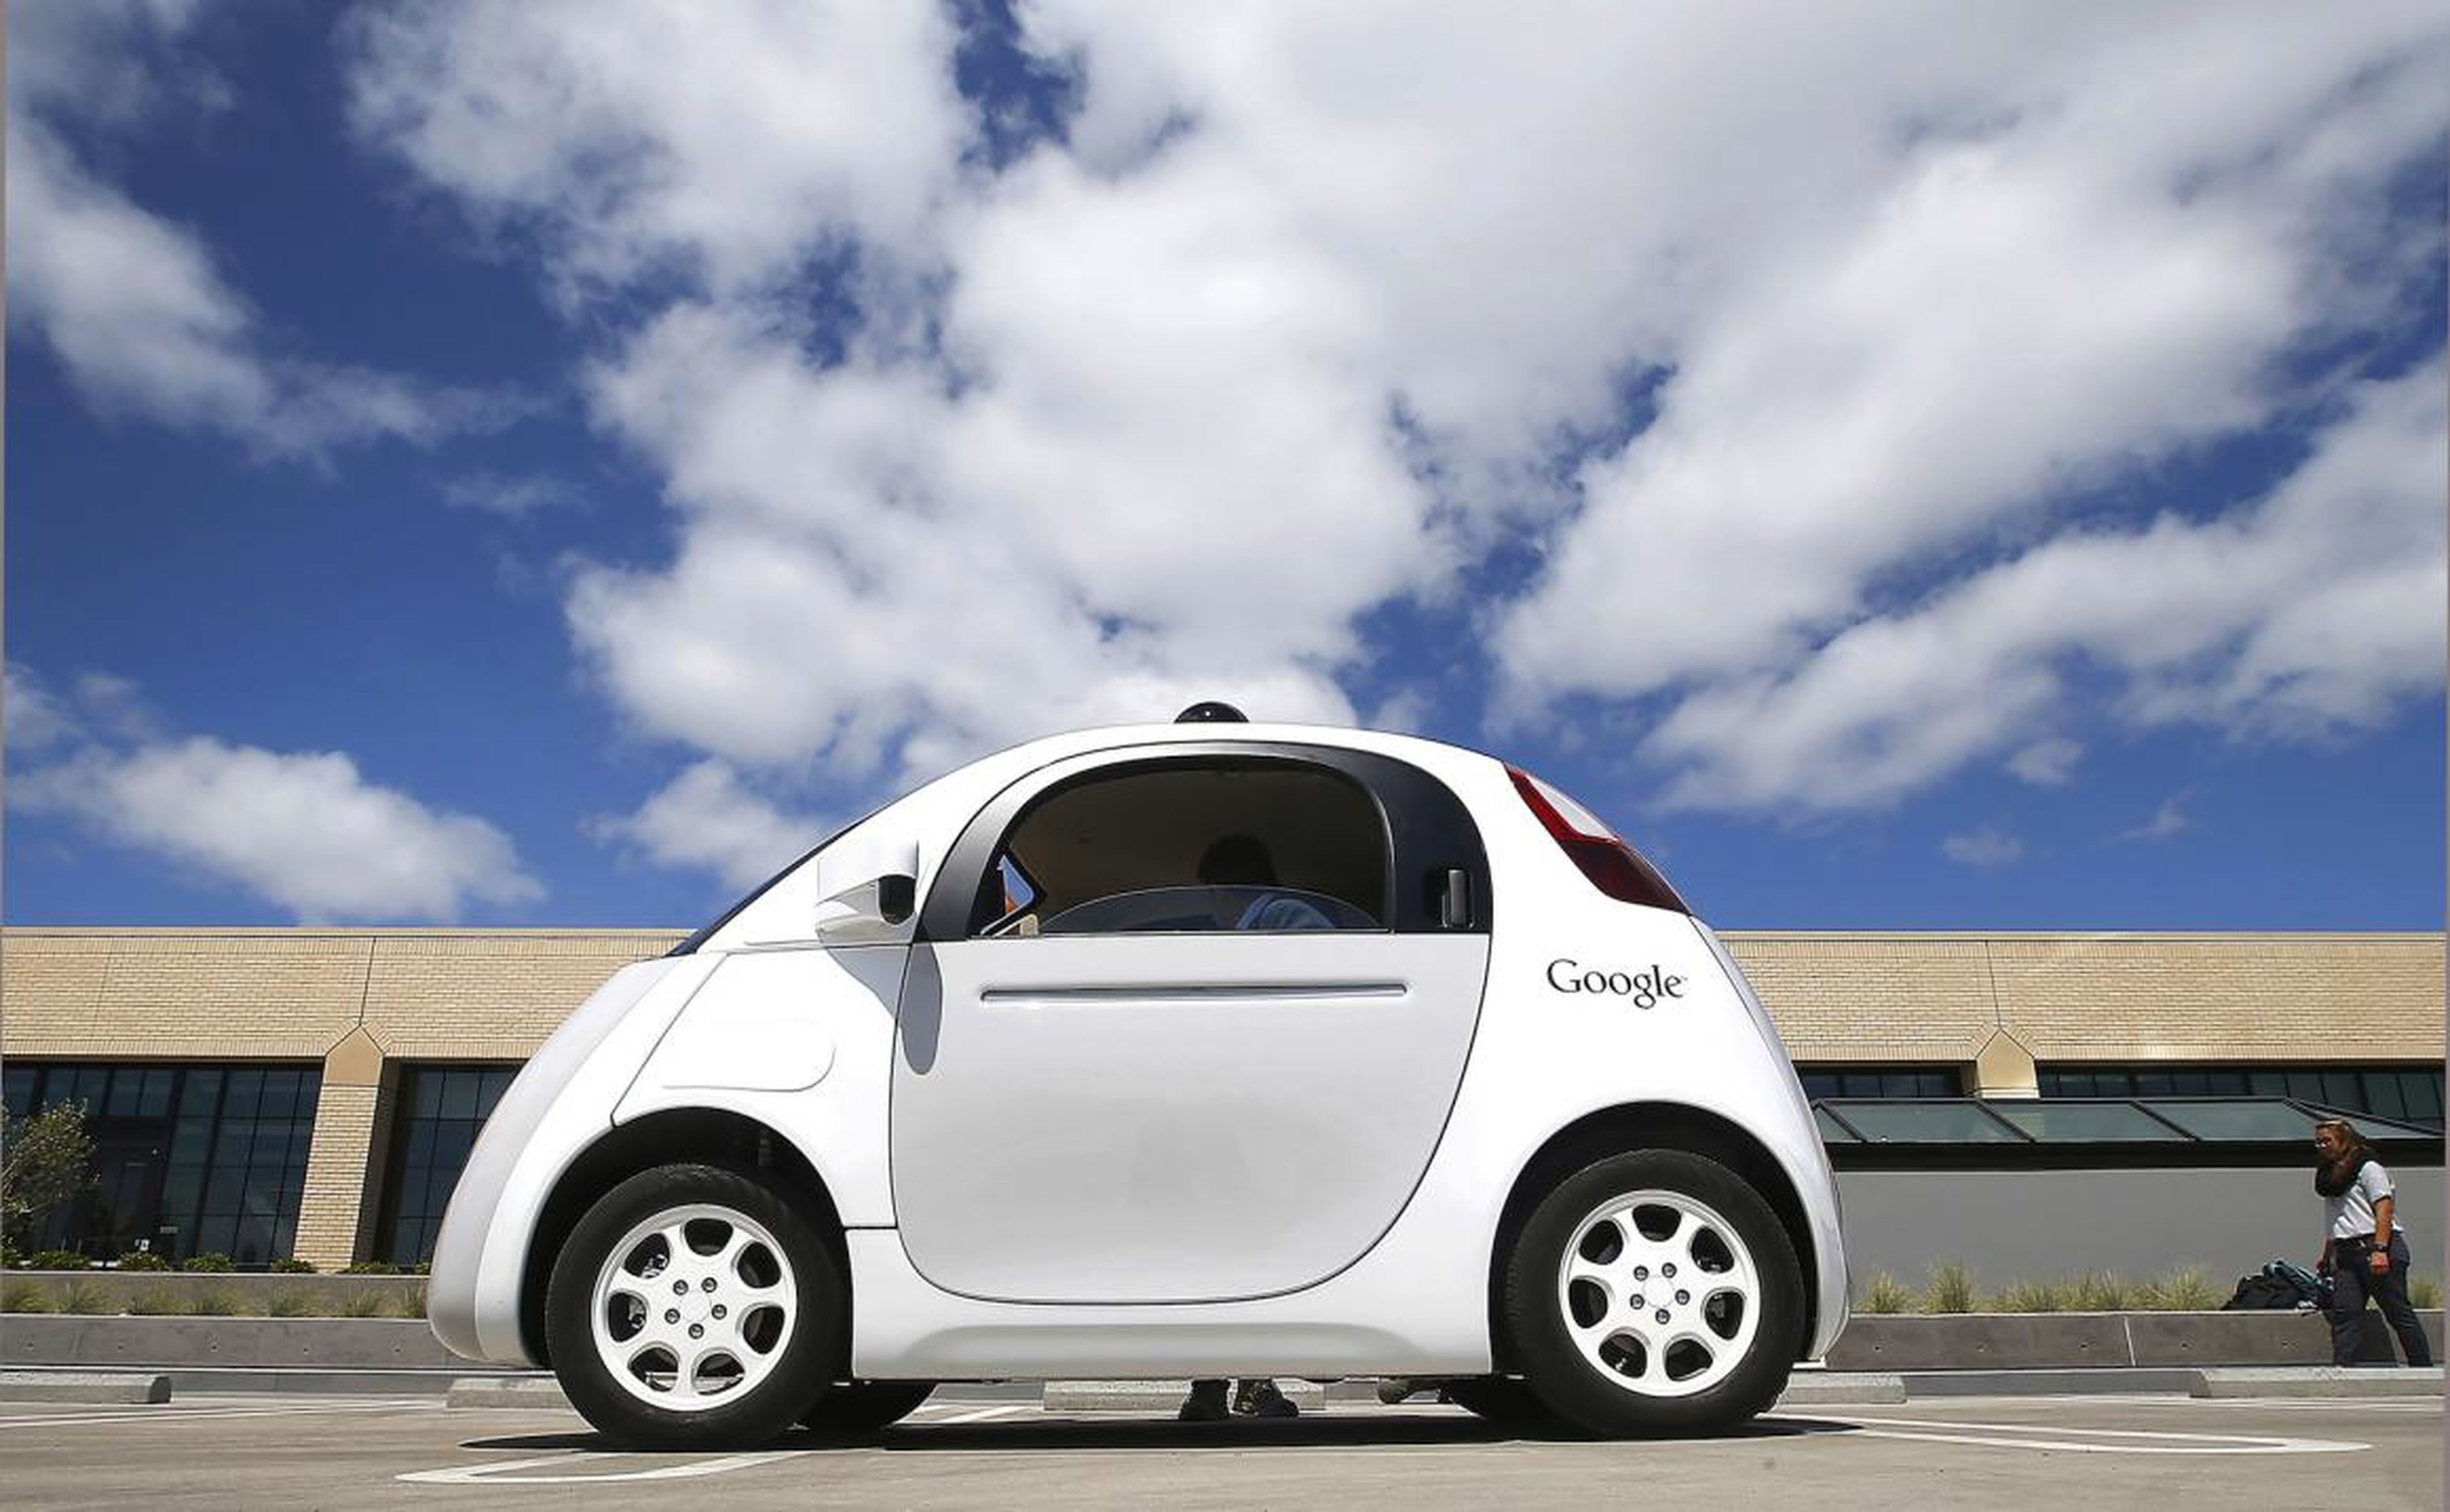 A purpose-built self-driving vehicle, called Firefly, enters the picture in 2014.